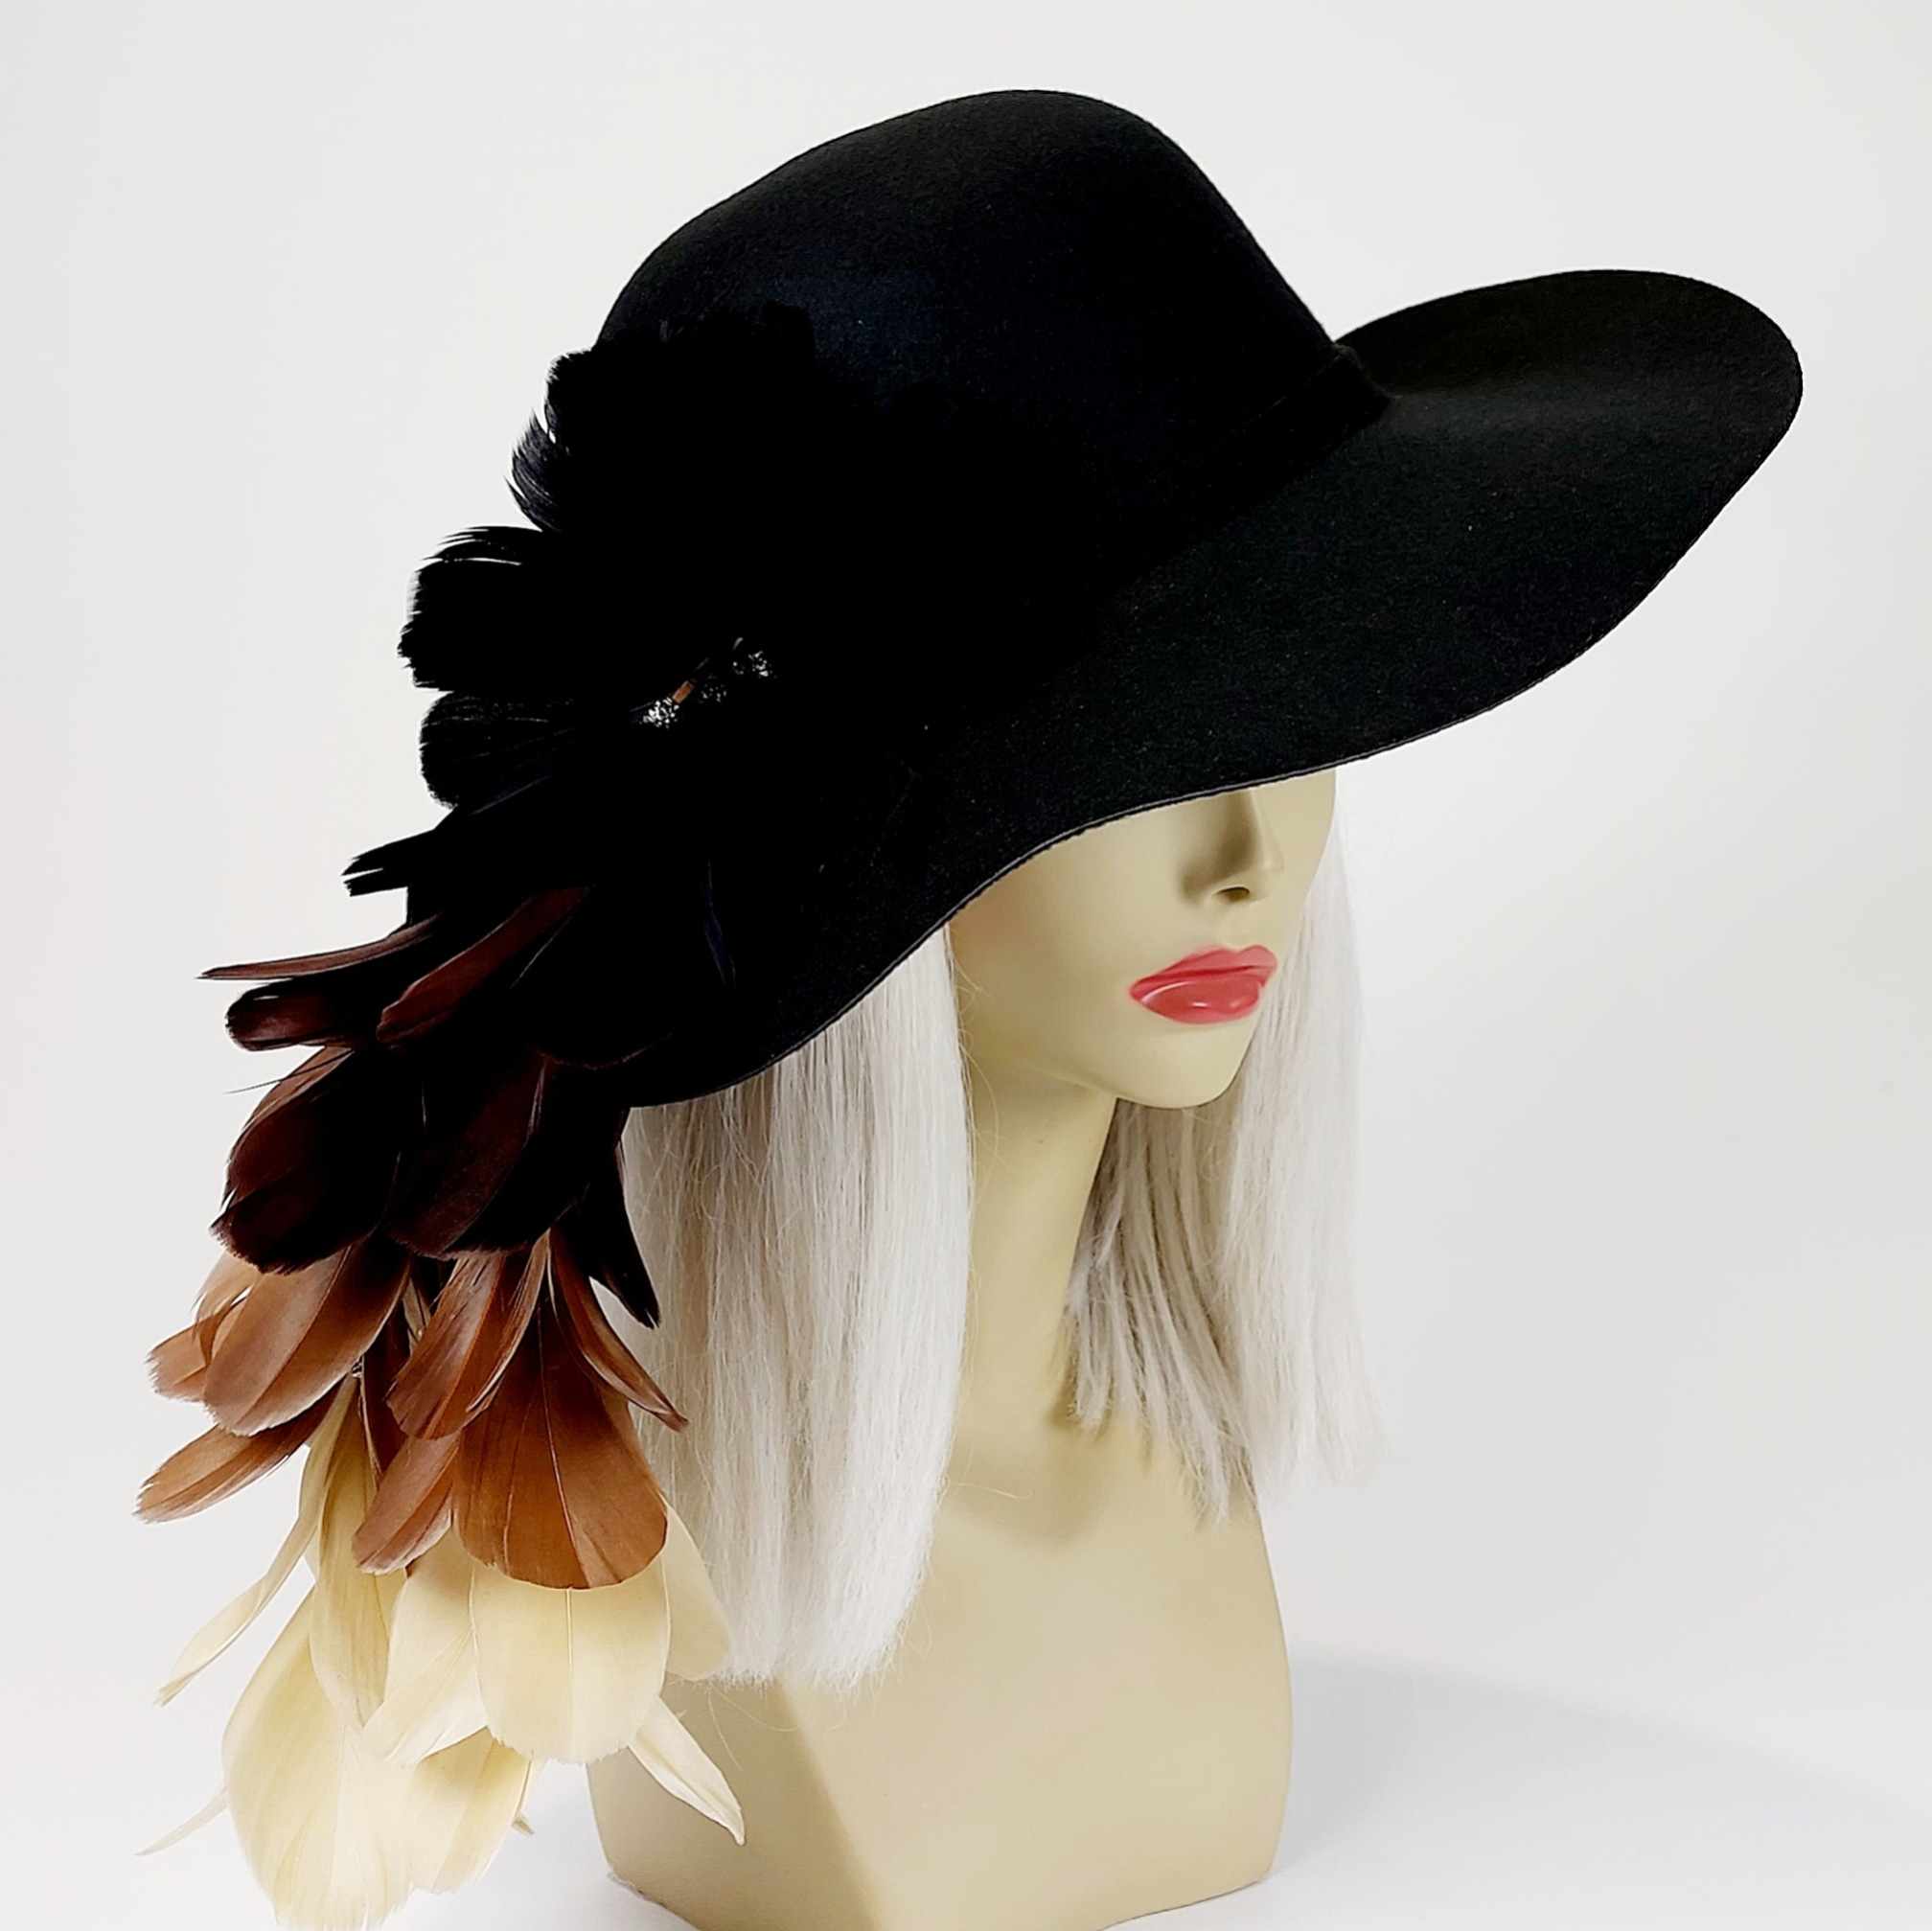 wear feather felt hat to races and festivals